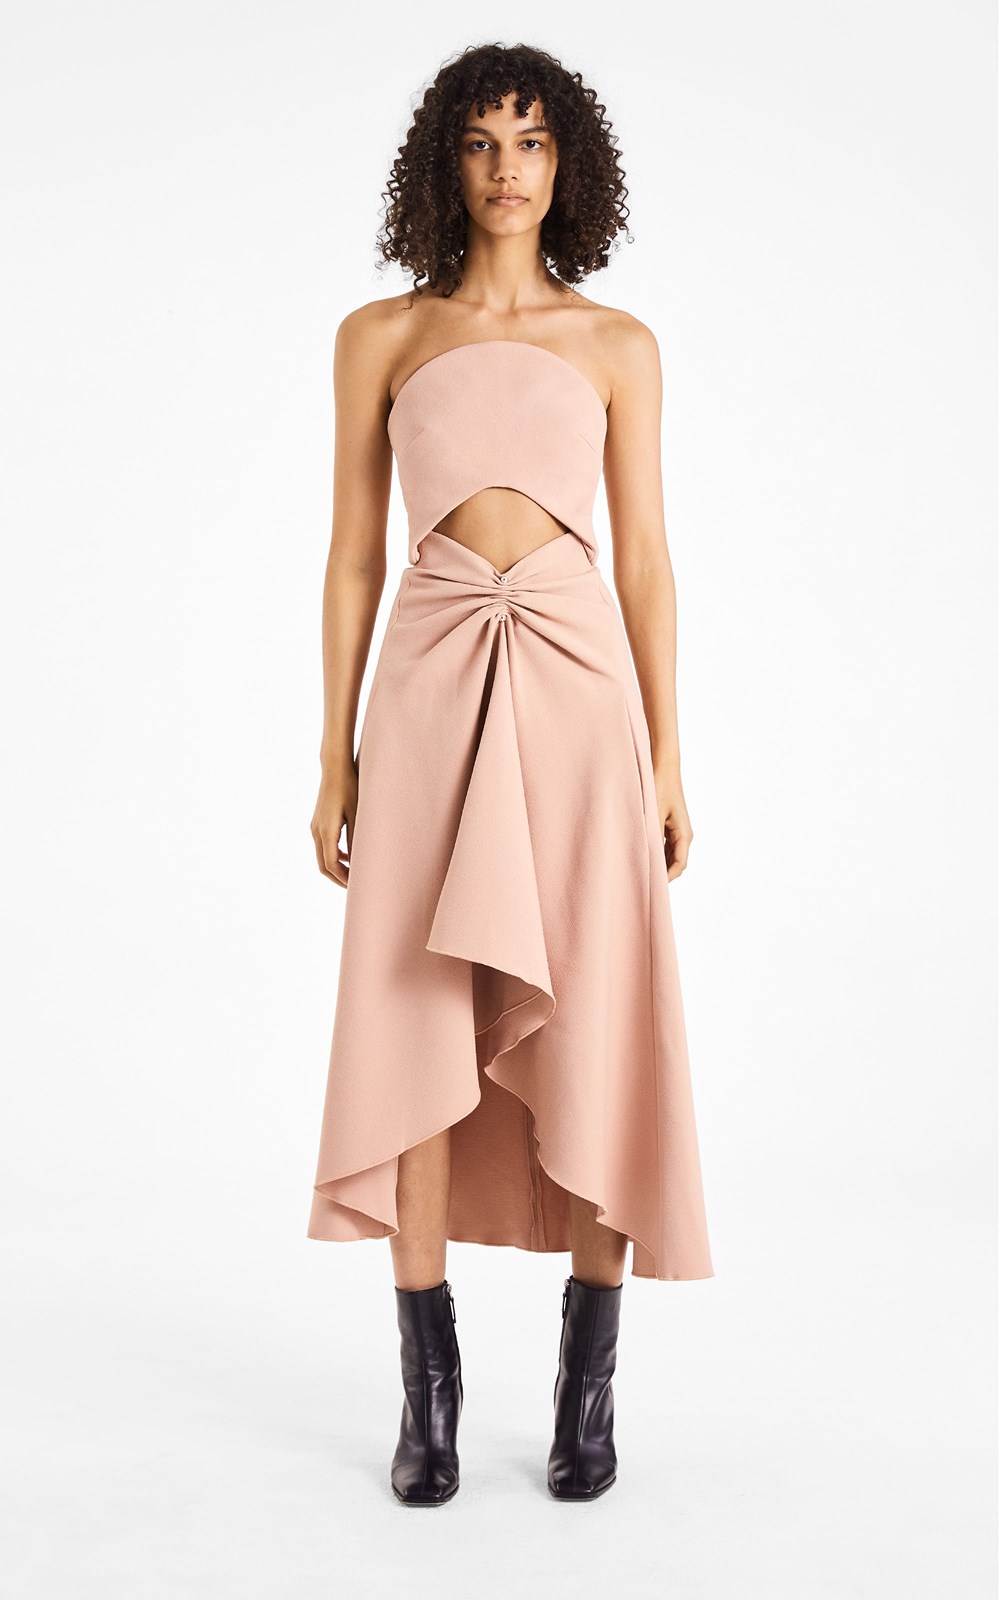 PIERCED CREPE CONCAVE DRESS by Dion Lee, available on dionlee.com for AUD1490 Kylie Jenner Dress SIMILAR PRODUCT